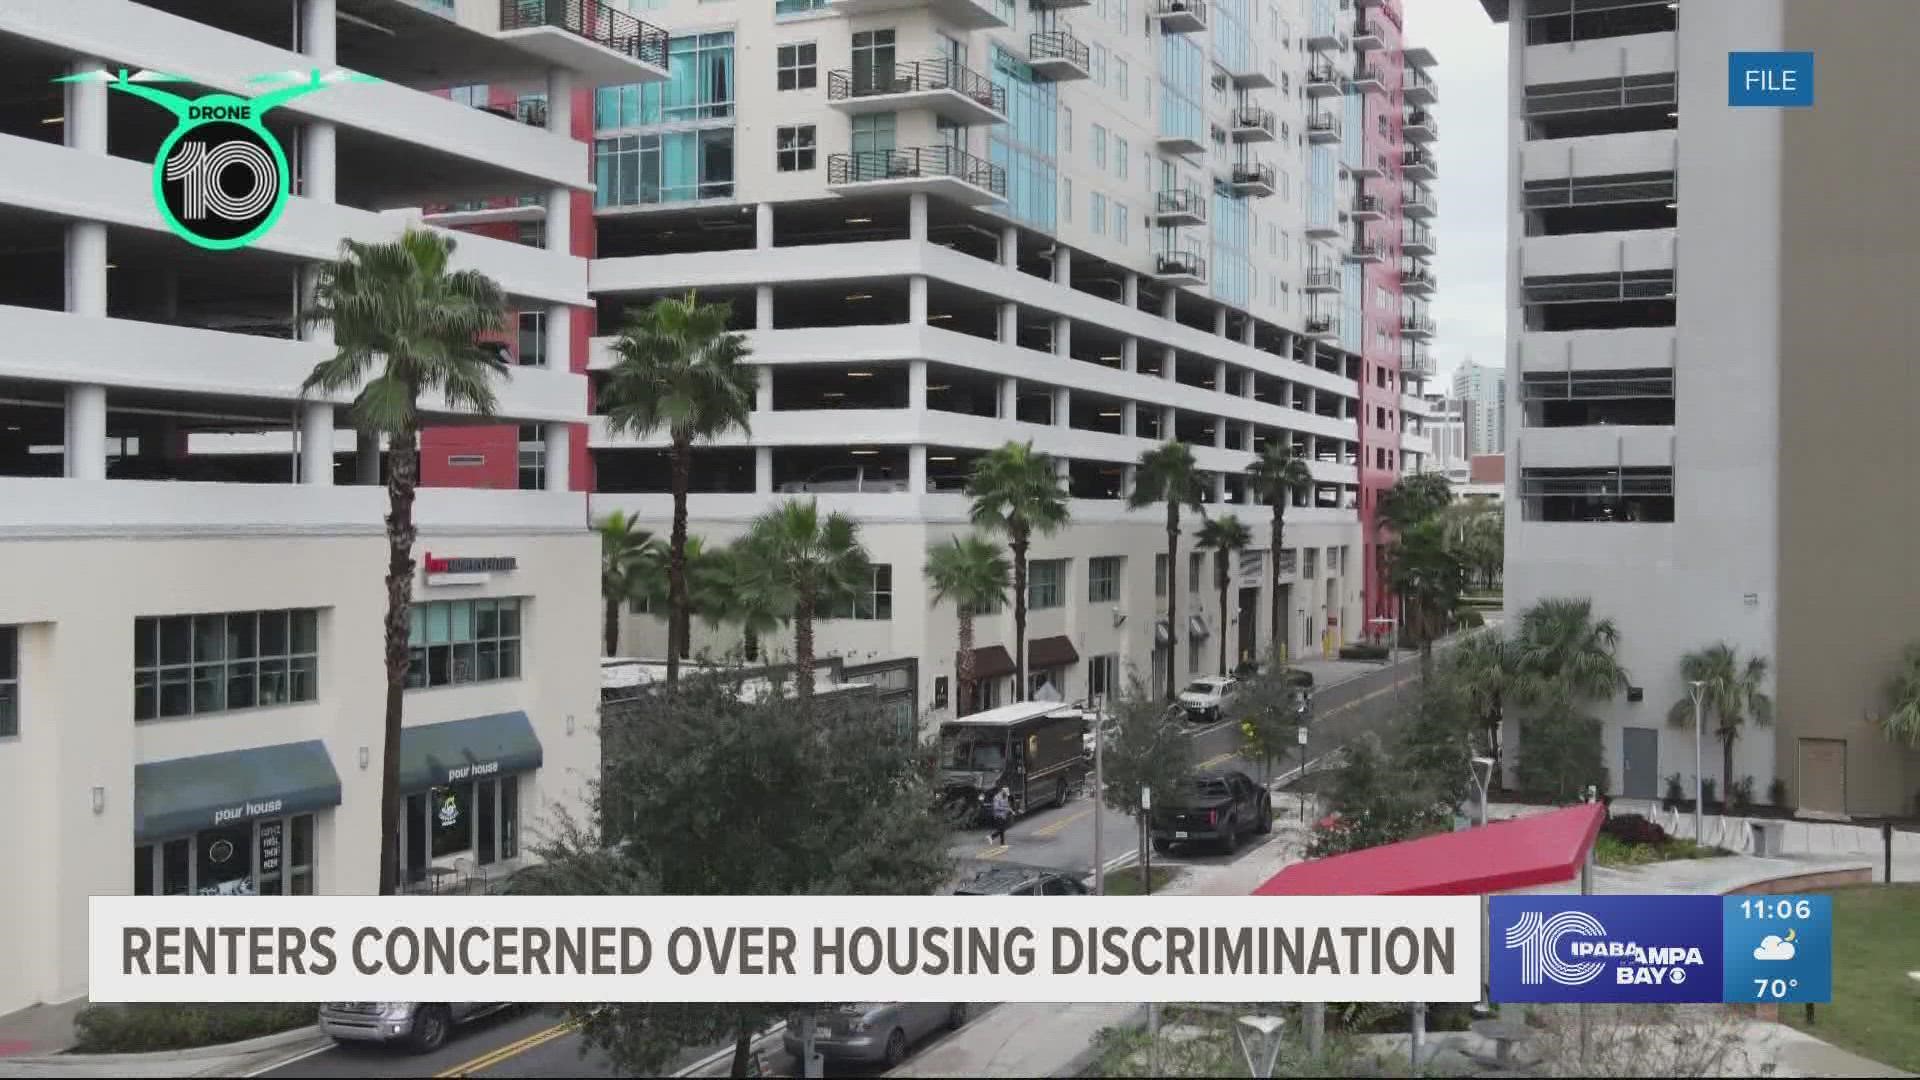 One tenant was forced out of his home after his landlord no longer accepted Section 8.